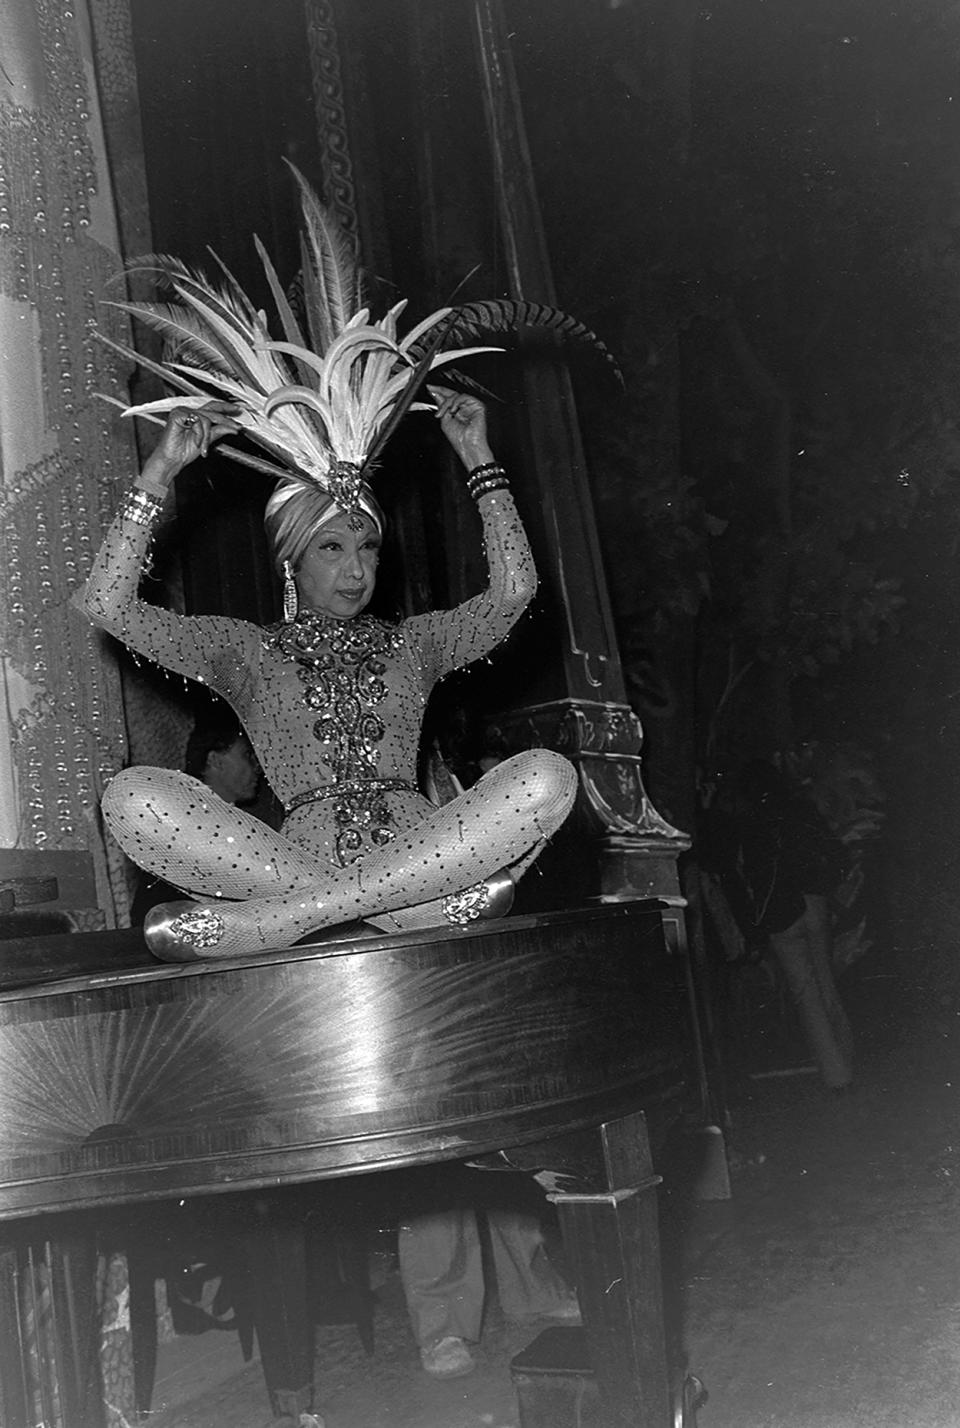 American born-French entertainer Josephine Baker in costume rehearses on stage before her performance during the "Battle of Versailles" fashion competition in Paris on November 29, 1973. (Photo by Reginald Gray/WWD/Penske Media via Getty Images)